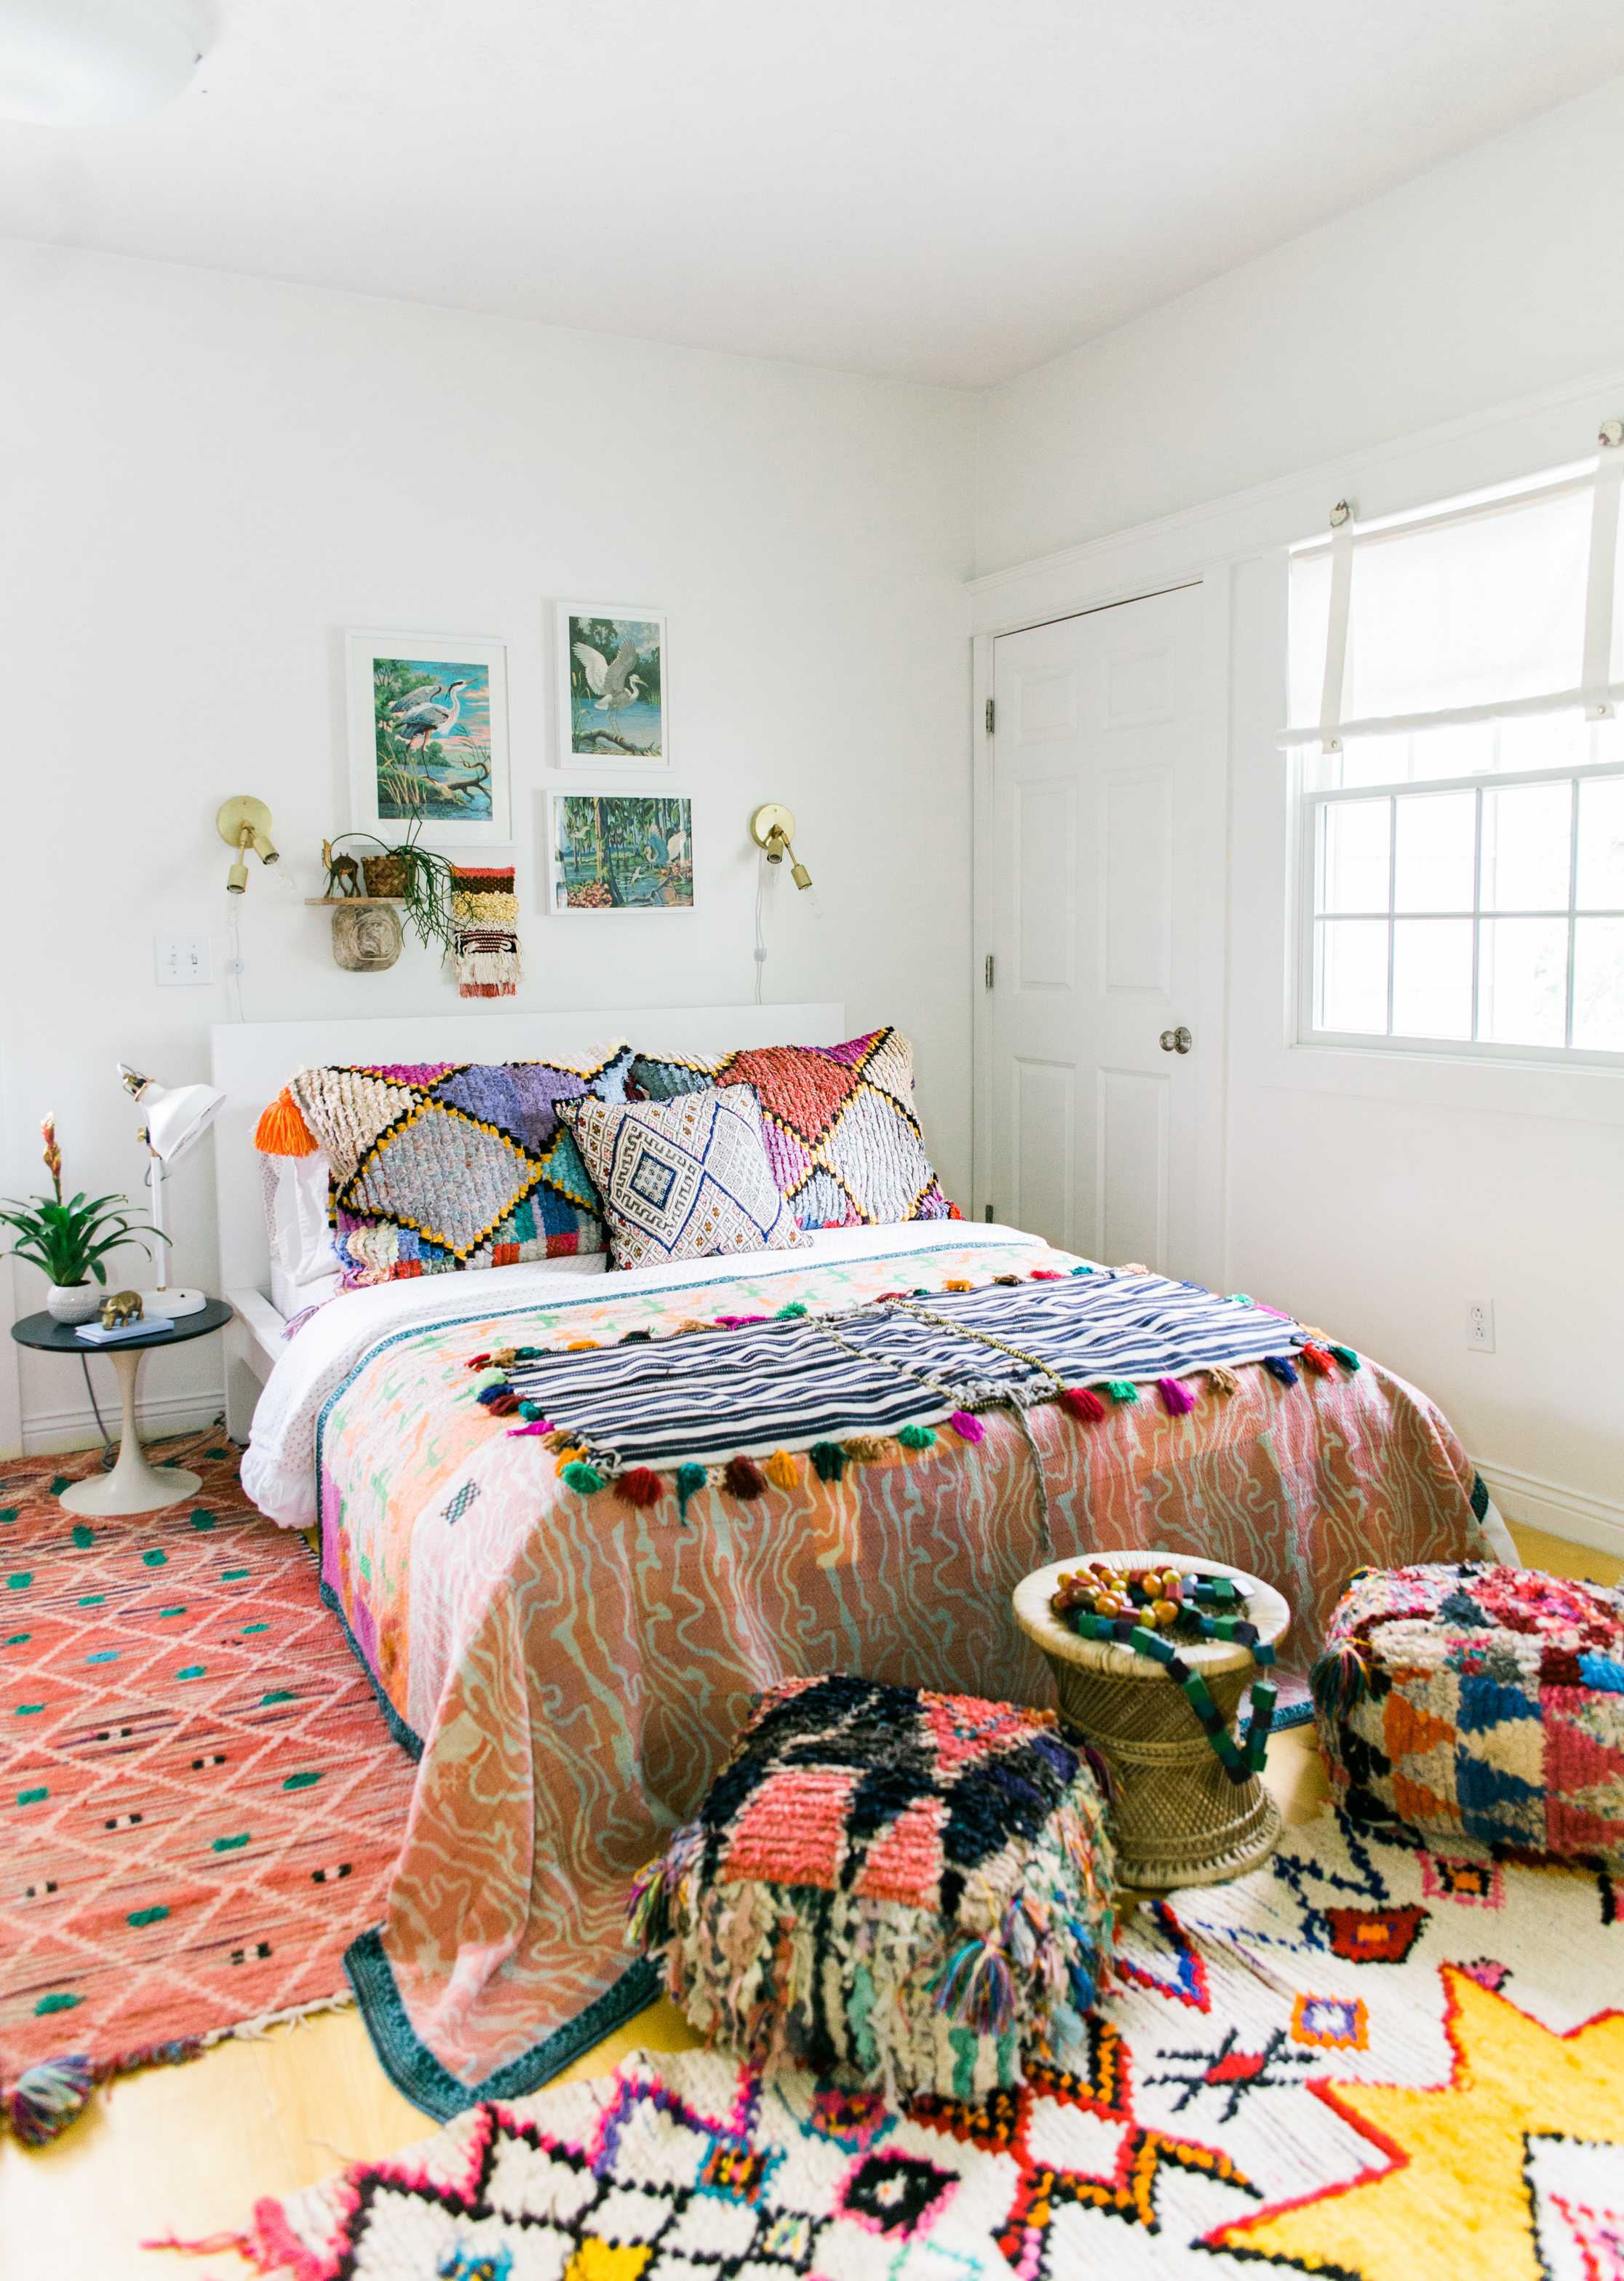 Bohemian Bedroom Designs That Will Catch Your Attention For Sure - Page